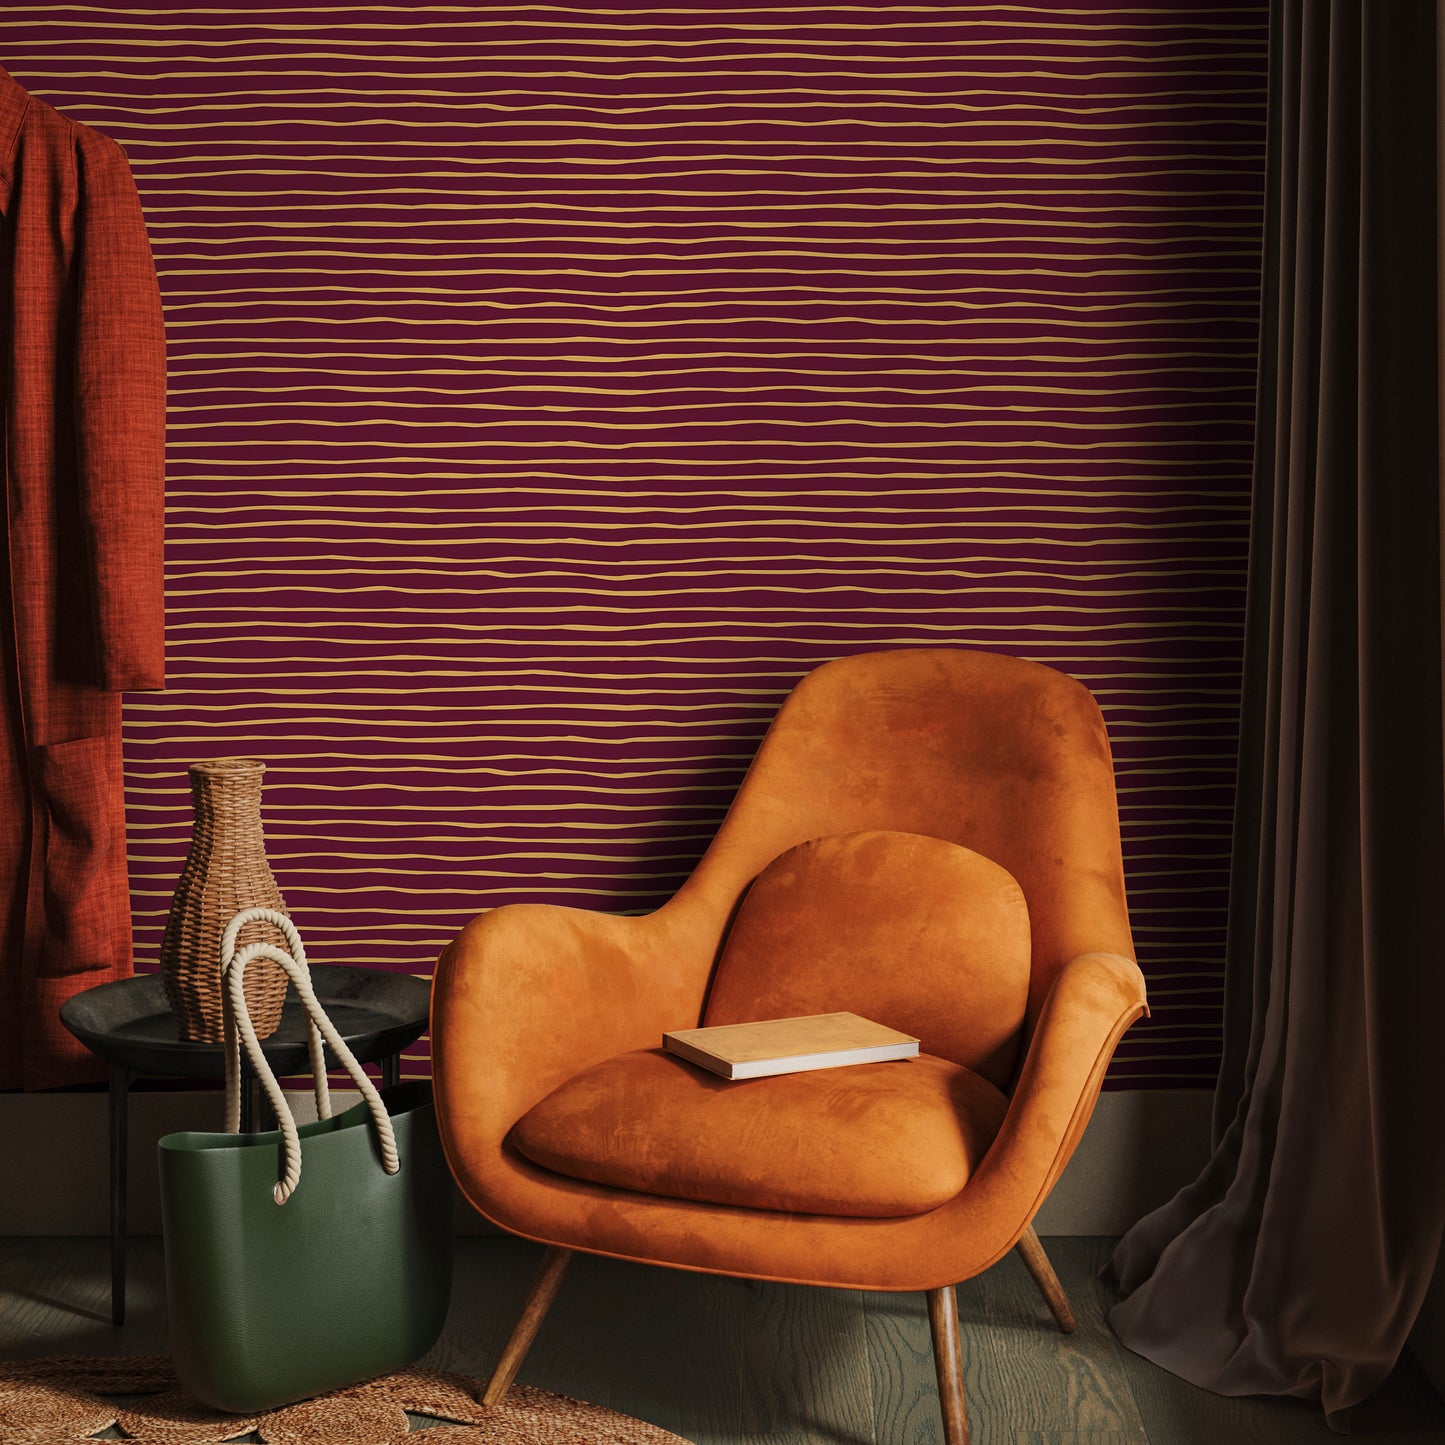 Modern Striped Wallpaper Waves Peel and Stick and Traditional Wallpaper - D773